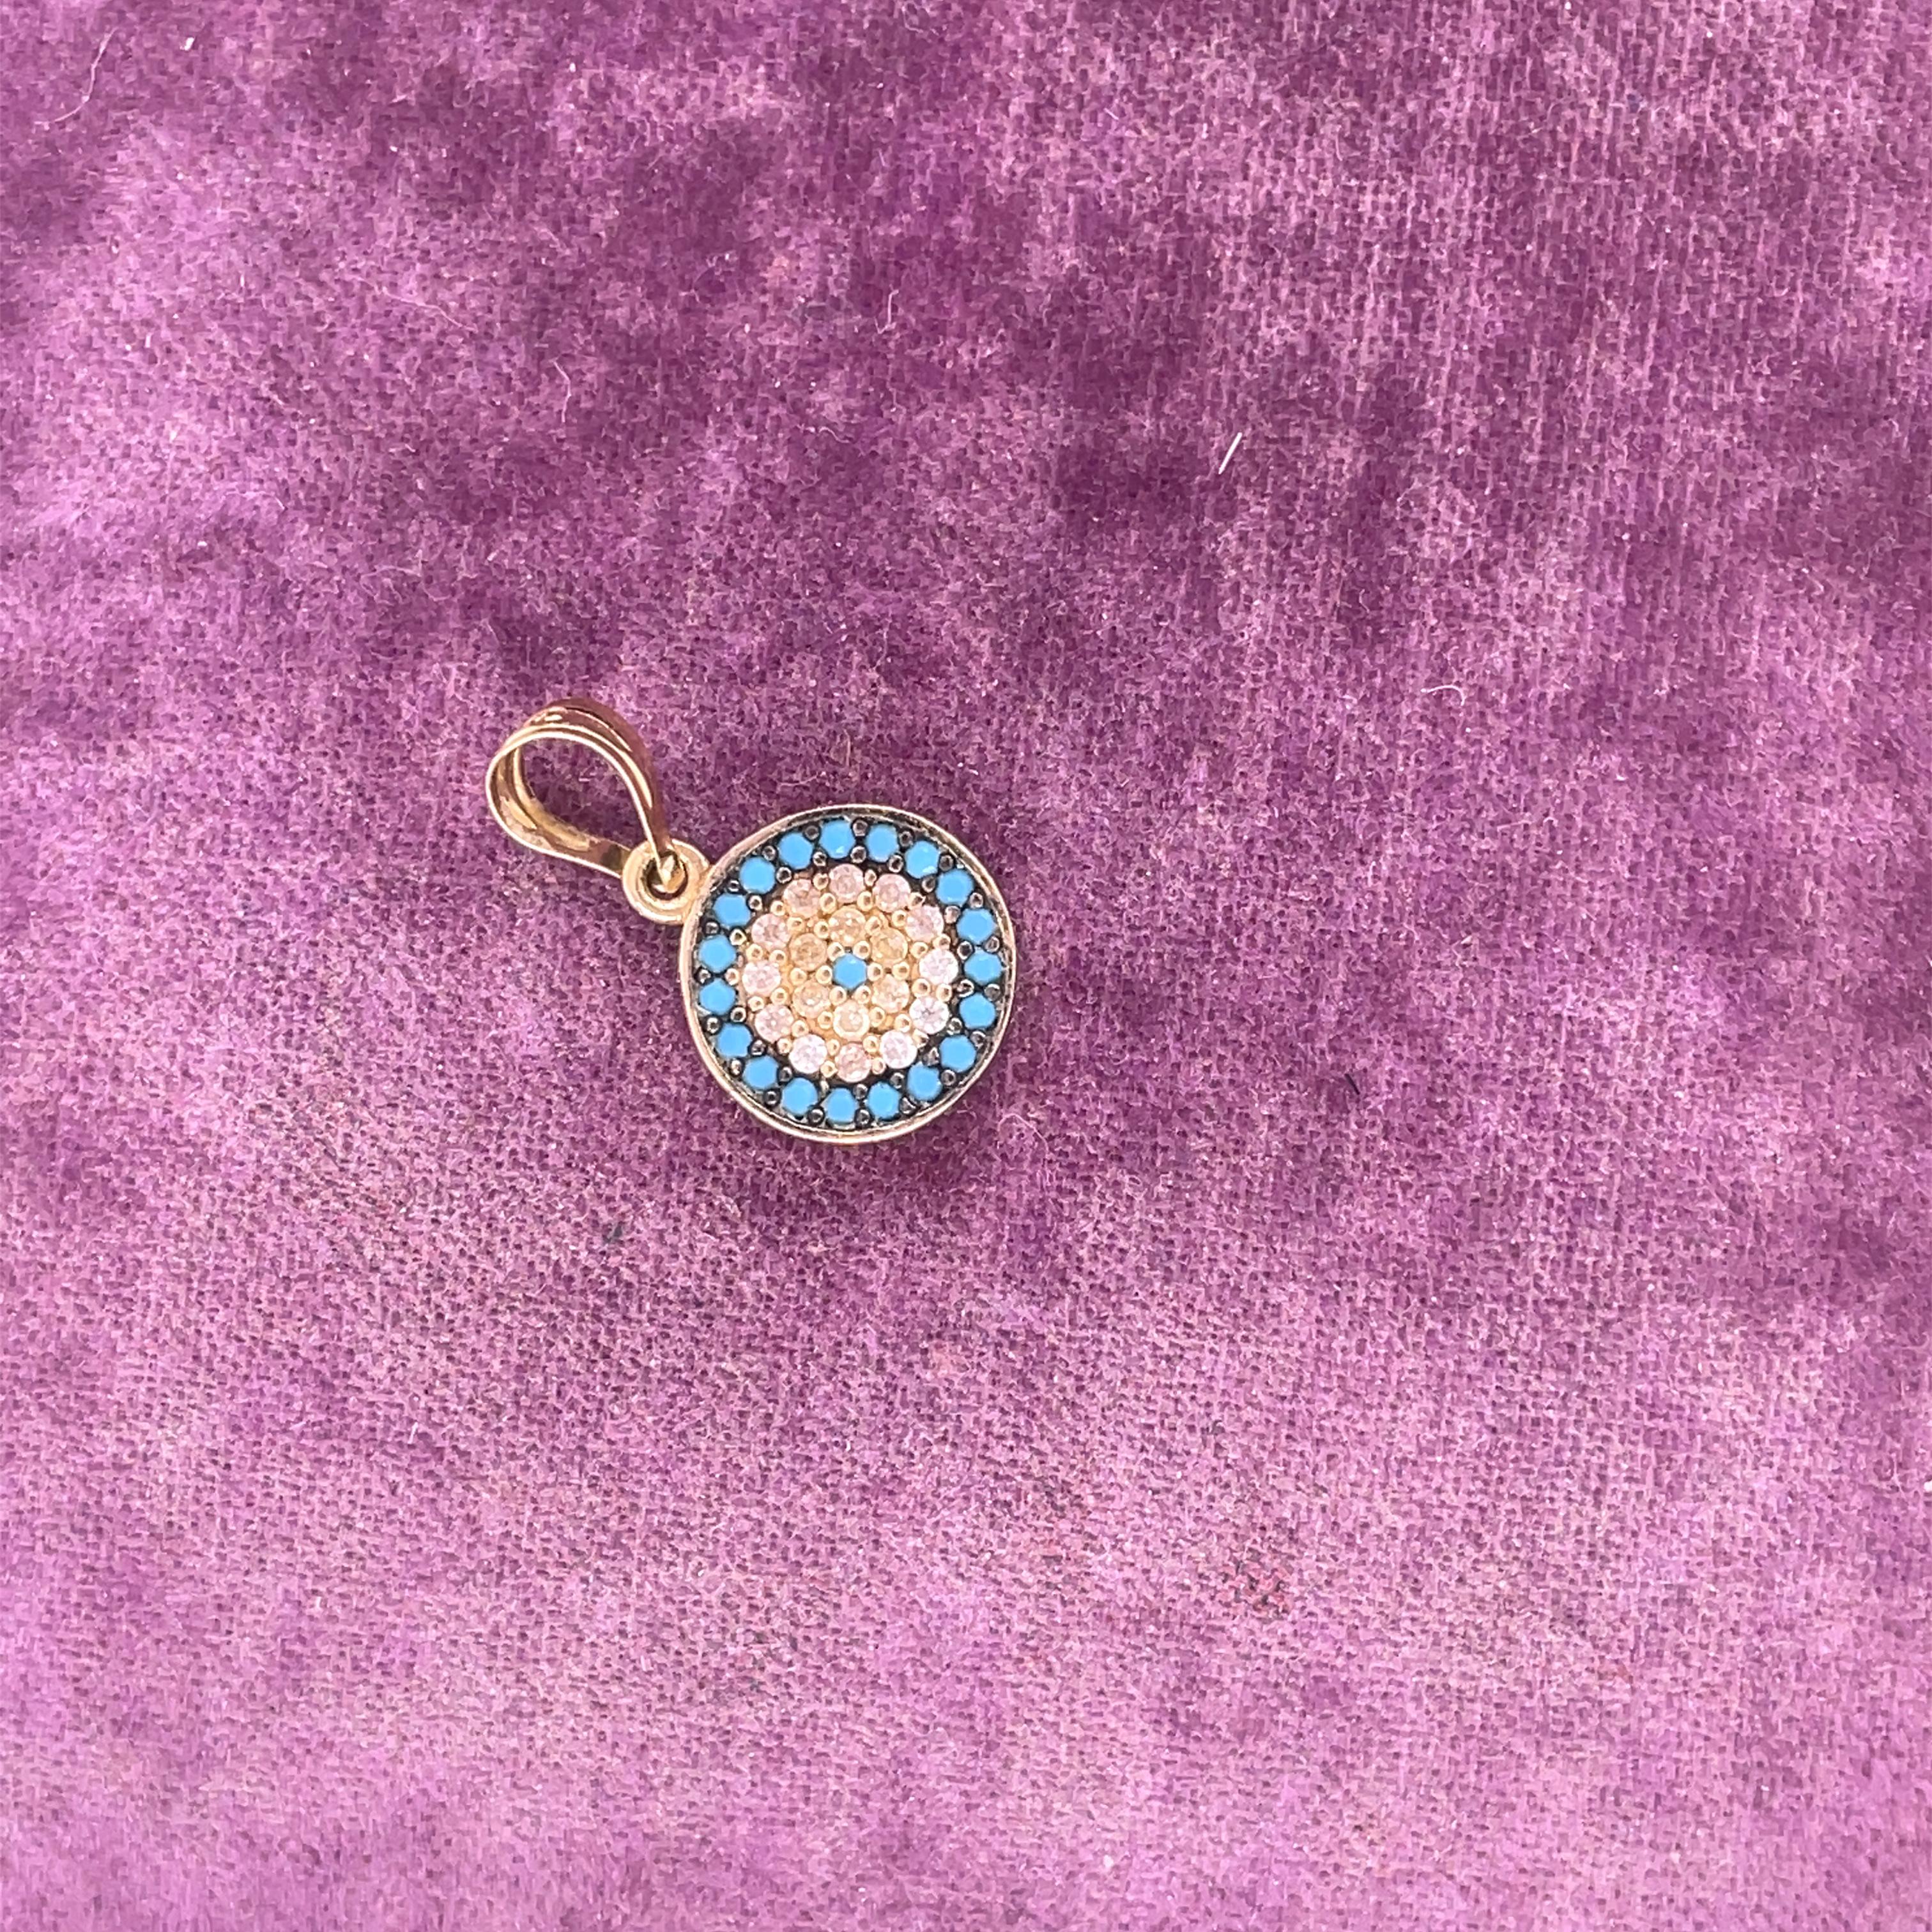 Title: Vintage 14K Yellow Gold Double Sided Pendant w/ Sapphires, Turquoise and Diamond

Year: 1980s

Item Details: 
Metal Type: 14k Yellow Gold [Hallmarked, and Tested]
Weight:  1.5 grams

Diamond Details:
Type: Natural
Weight: .25ct, total